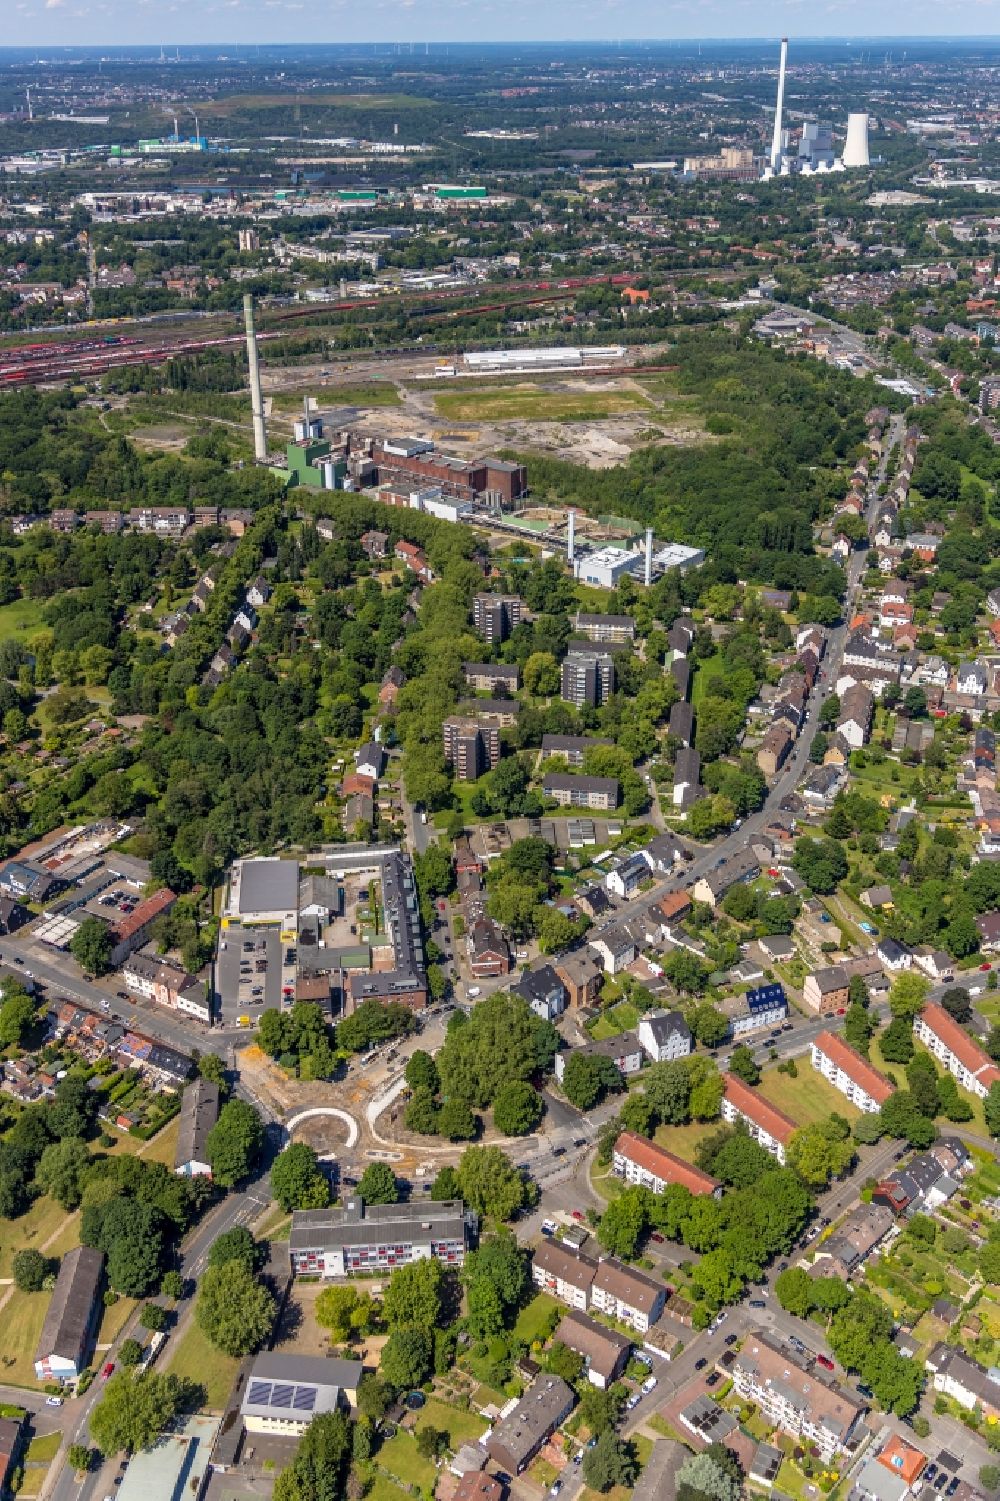 Aerial image Herne - Traffic management of the roundabout road Koenigstrasse, Dorneburger Strasse and Holsterhauser Strasse in the district Wanne-Eickel in Herne in the state North Rhine-Westphalia, Germany